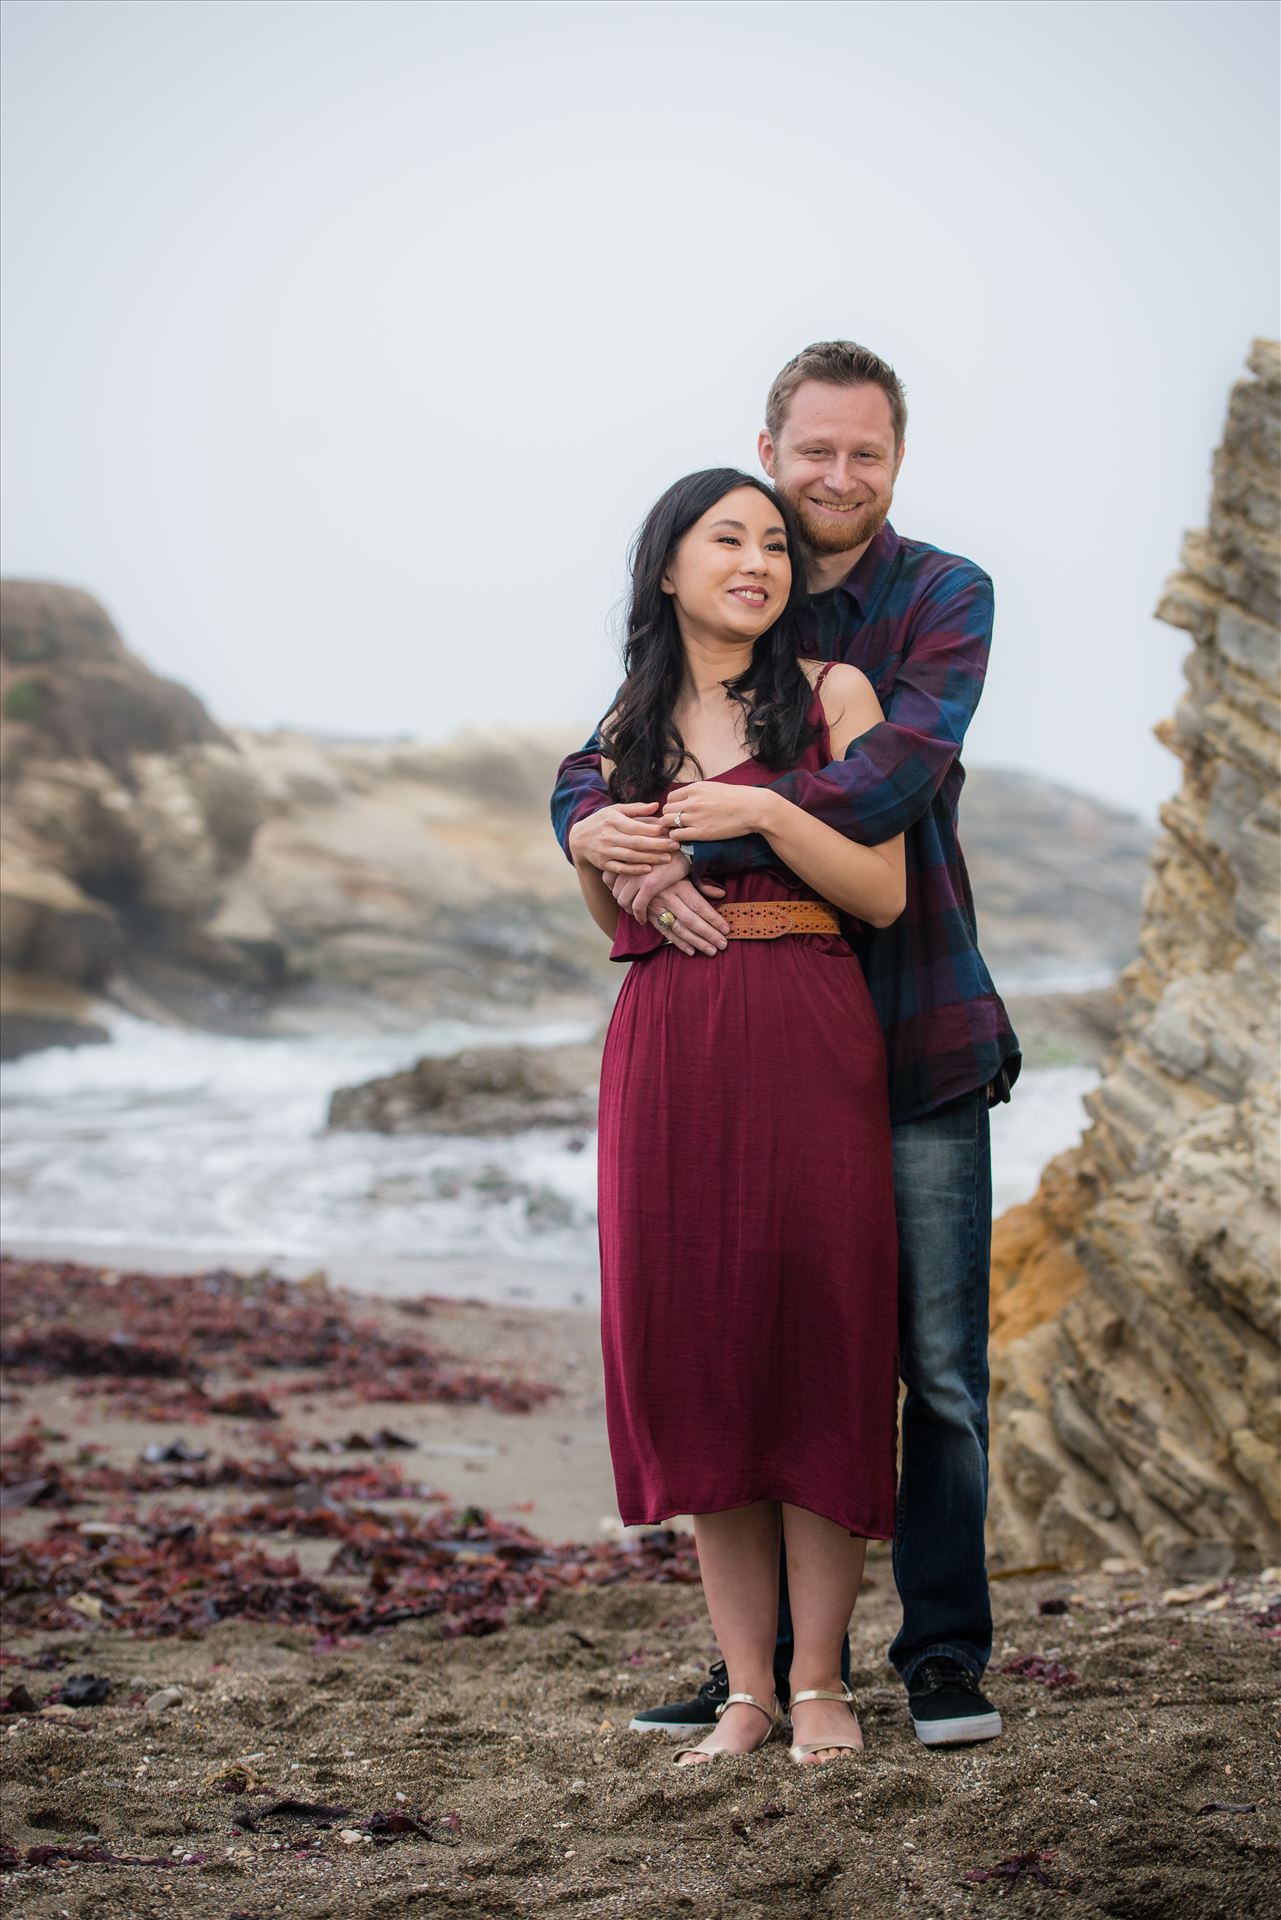 Carmen and Josh 01 - Montana de Oro Spooners Cove Engagement Photography Los Osos California.  Romance by the sea by Sarah Williams